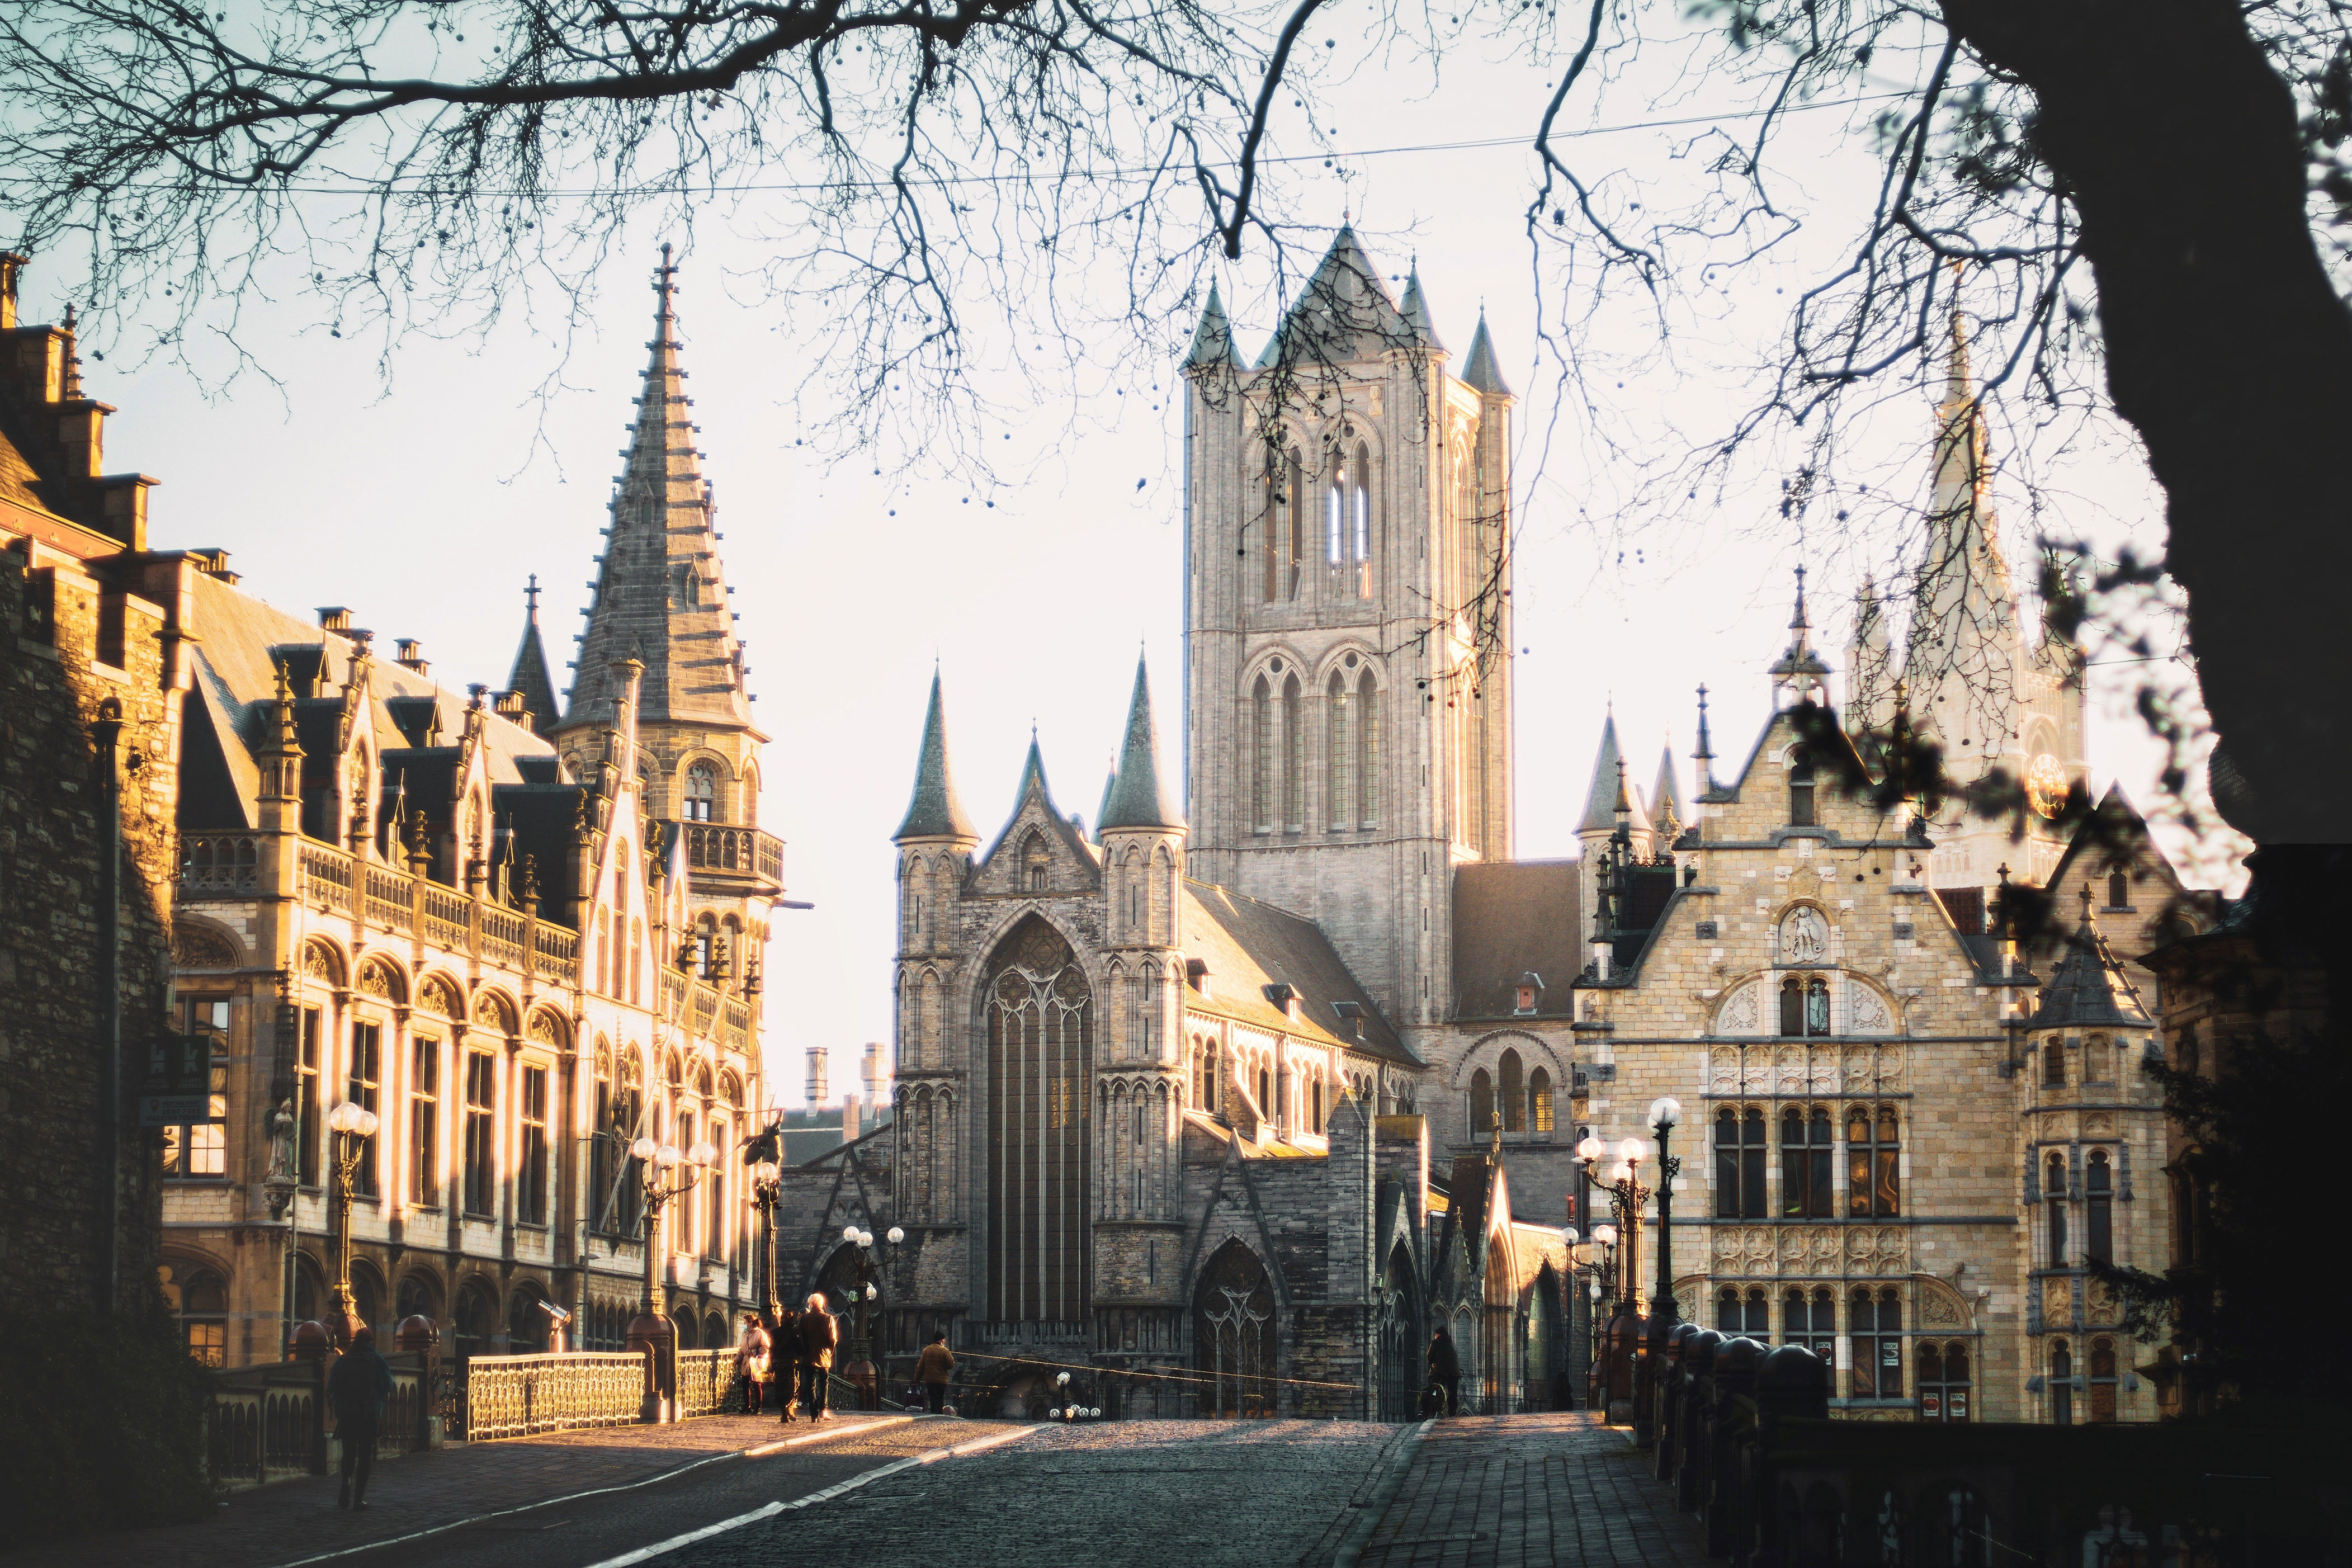 The charming center of Ghent has been <a href="https://www.stepupsmartcities.eu/Default.aspx?tabid=3732&aid=2115&rid=3286">car-free since 1996</a>, as part of the city’s efforts to get rid of traffic and improve air quality. The 86-acre area is filled with Gothic-style buildings and snaking canals, which are much easier (and nicer) to appreciate from bicycles and electric boats than in the midst of a rush-hour traffic jam.<p>Sign up to receive the latest news, expert tips, and inspiration on all things travel</p><a href="https://www.cntraveler.com/newsletter/the-daily?sourceCode=msnsend">Inspire Me</a>